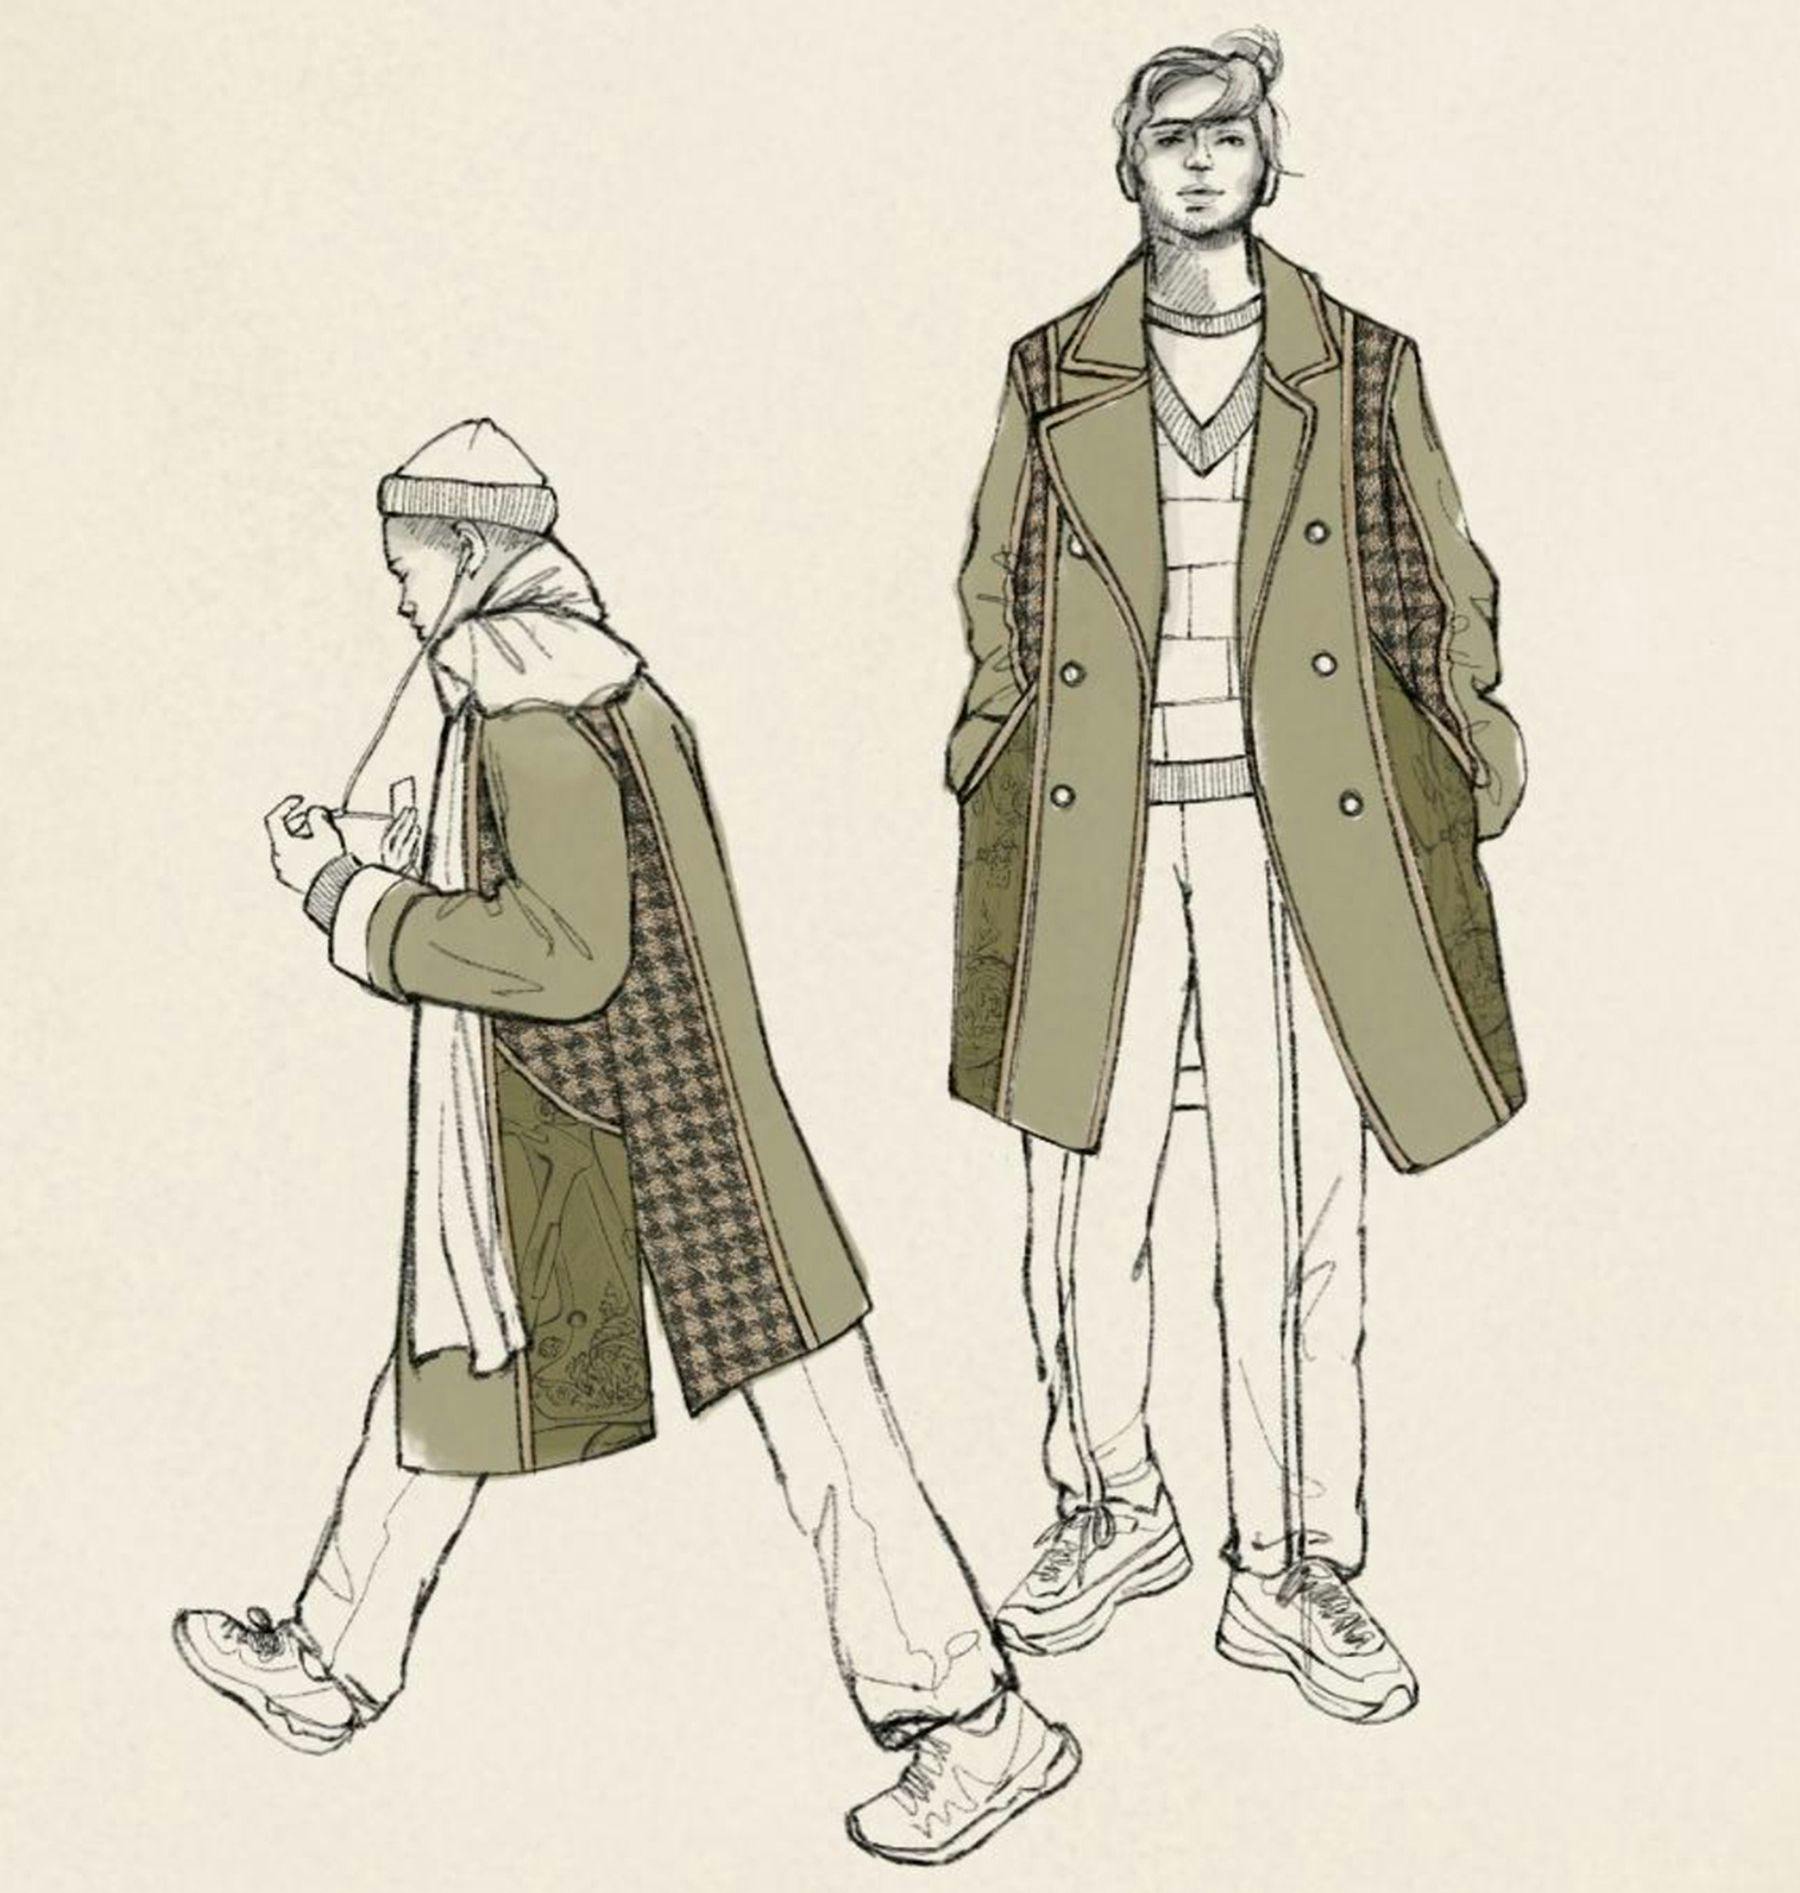 Two combined digital and pencil sketches of models. Both are wearing a long green jacket with white trousers and trainers. One is walking while wearing headphones, a white scarf and hat. The other is standing straight, their white jumper visible behind their coat.